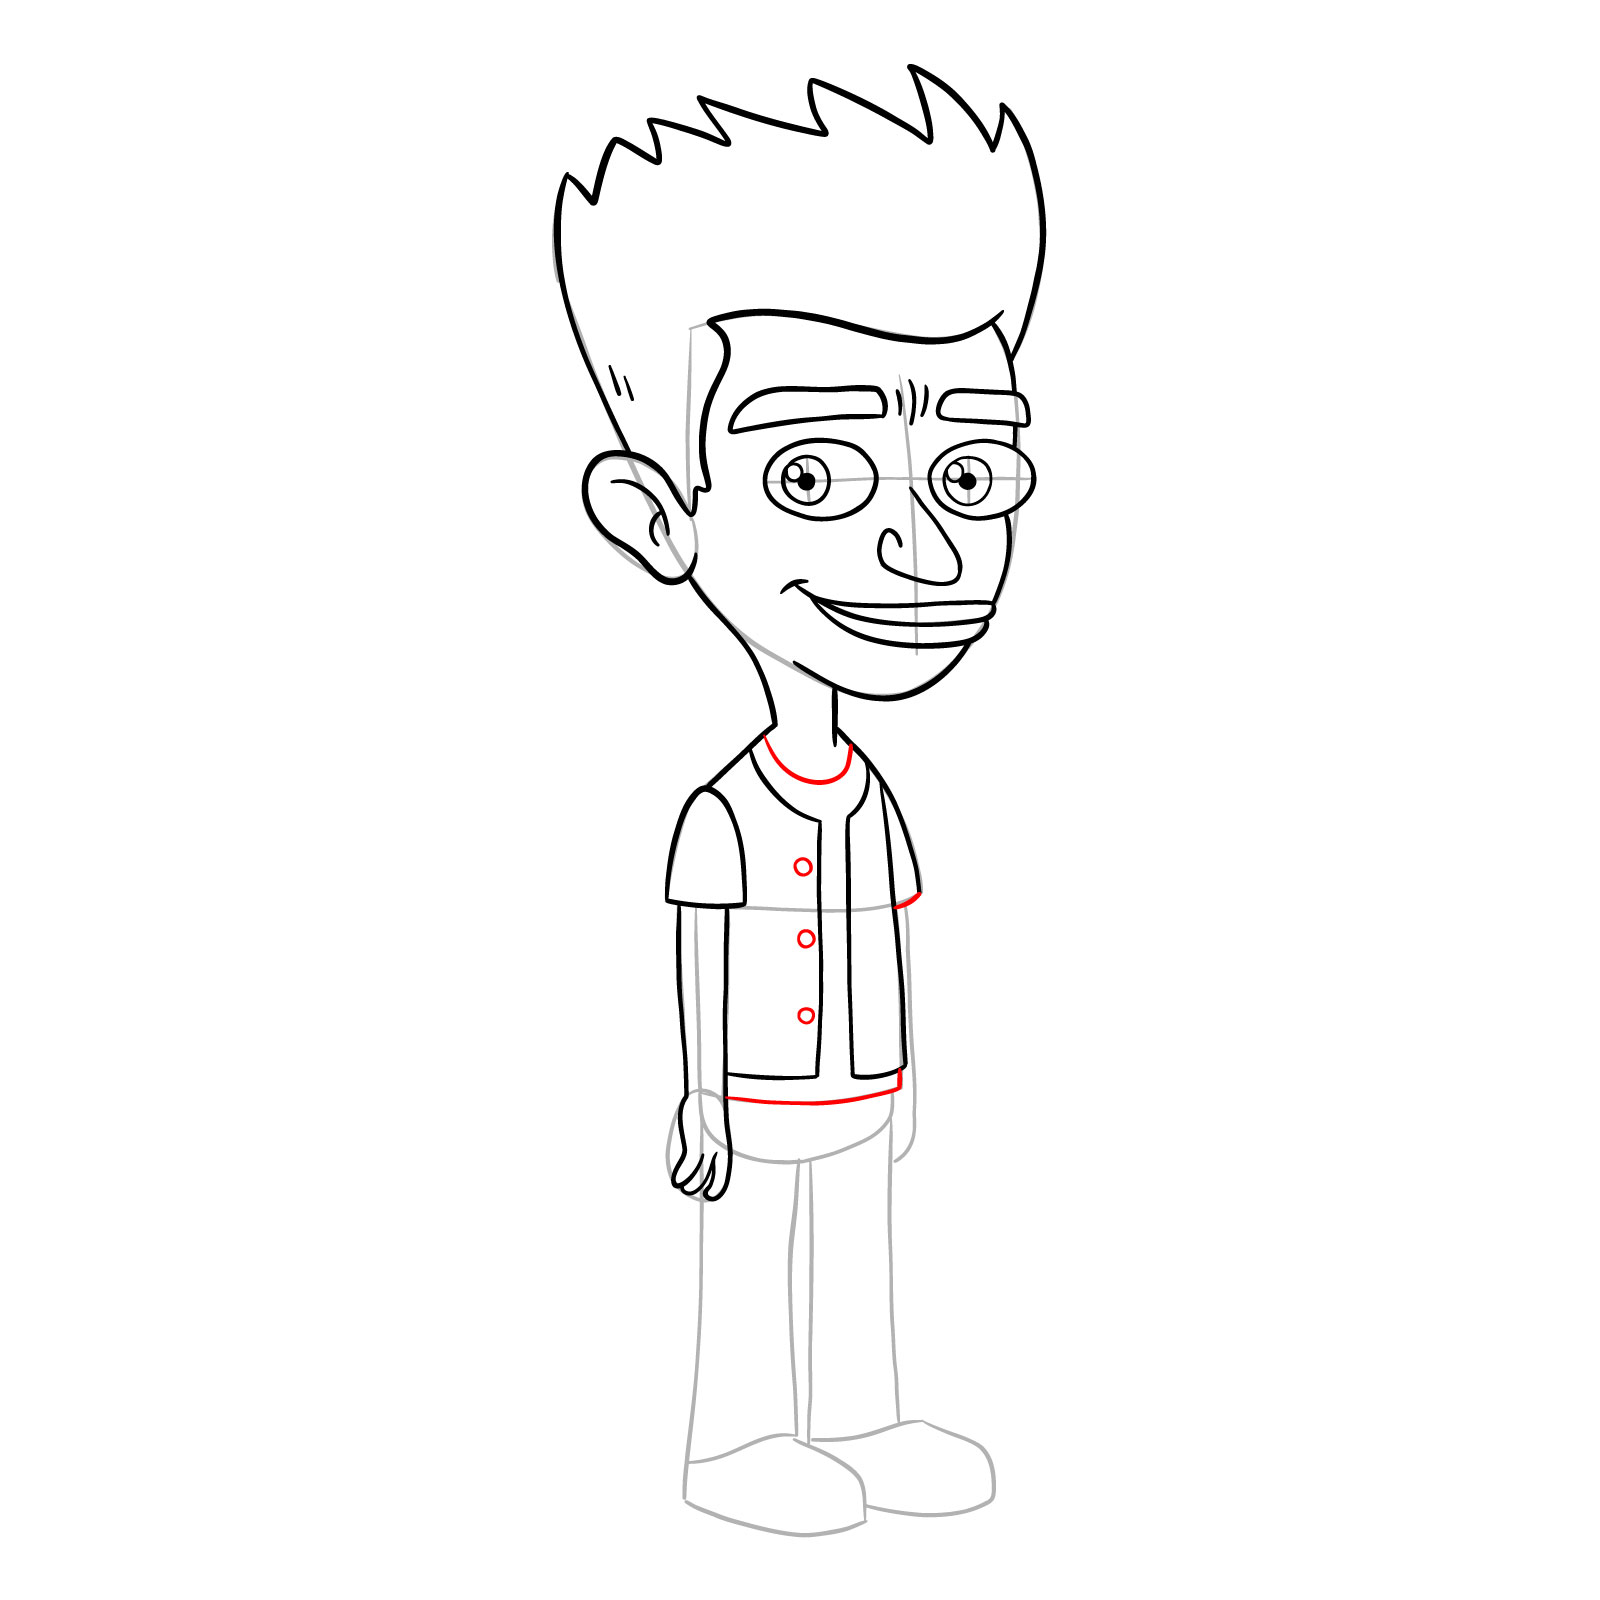 How to draw Jay from Big Mouth - step 15